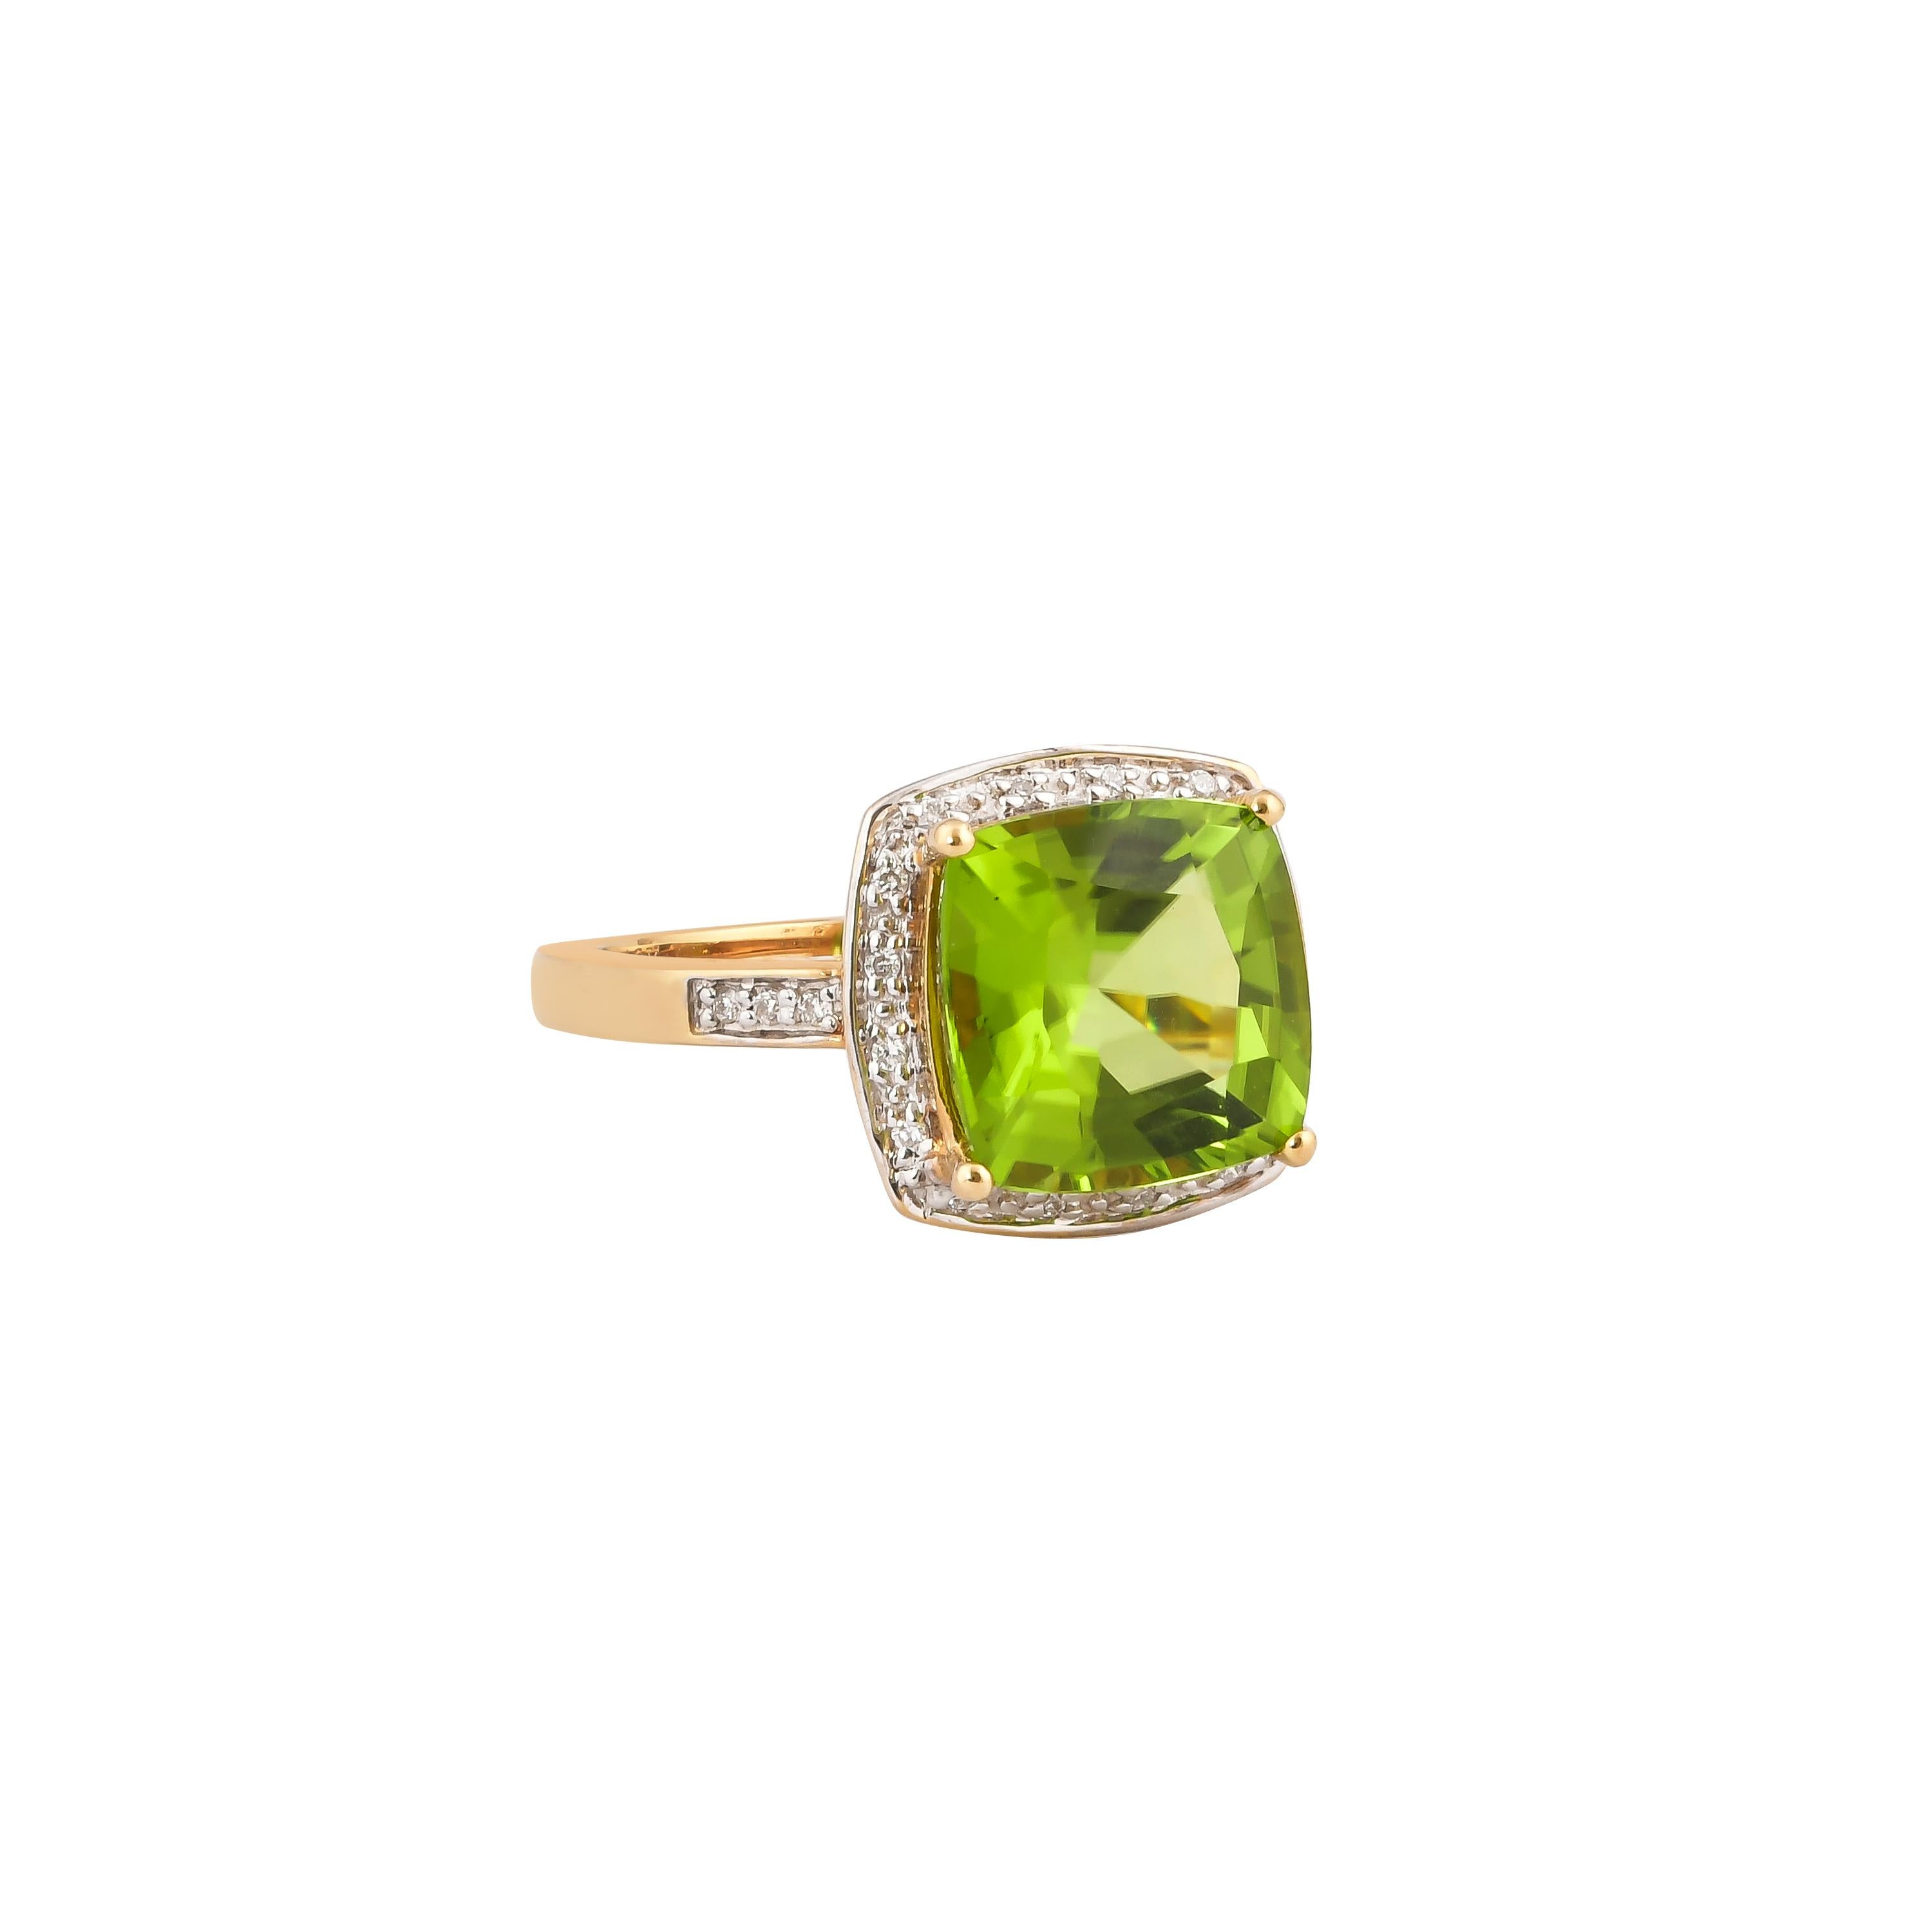 This collection features an array of pretty peridot rings! Accented with diamonds these rings are made in yellow gold and present a vibrant and fresh look. 

Classic peridot ring in 18K yellow gold with diamonds. 

Peridot: 4.600 carat cushion